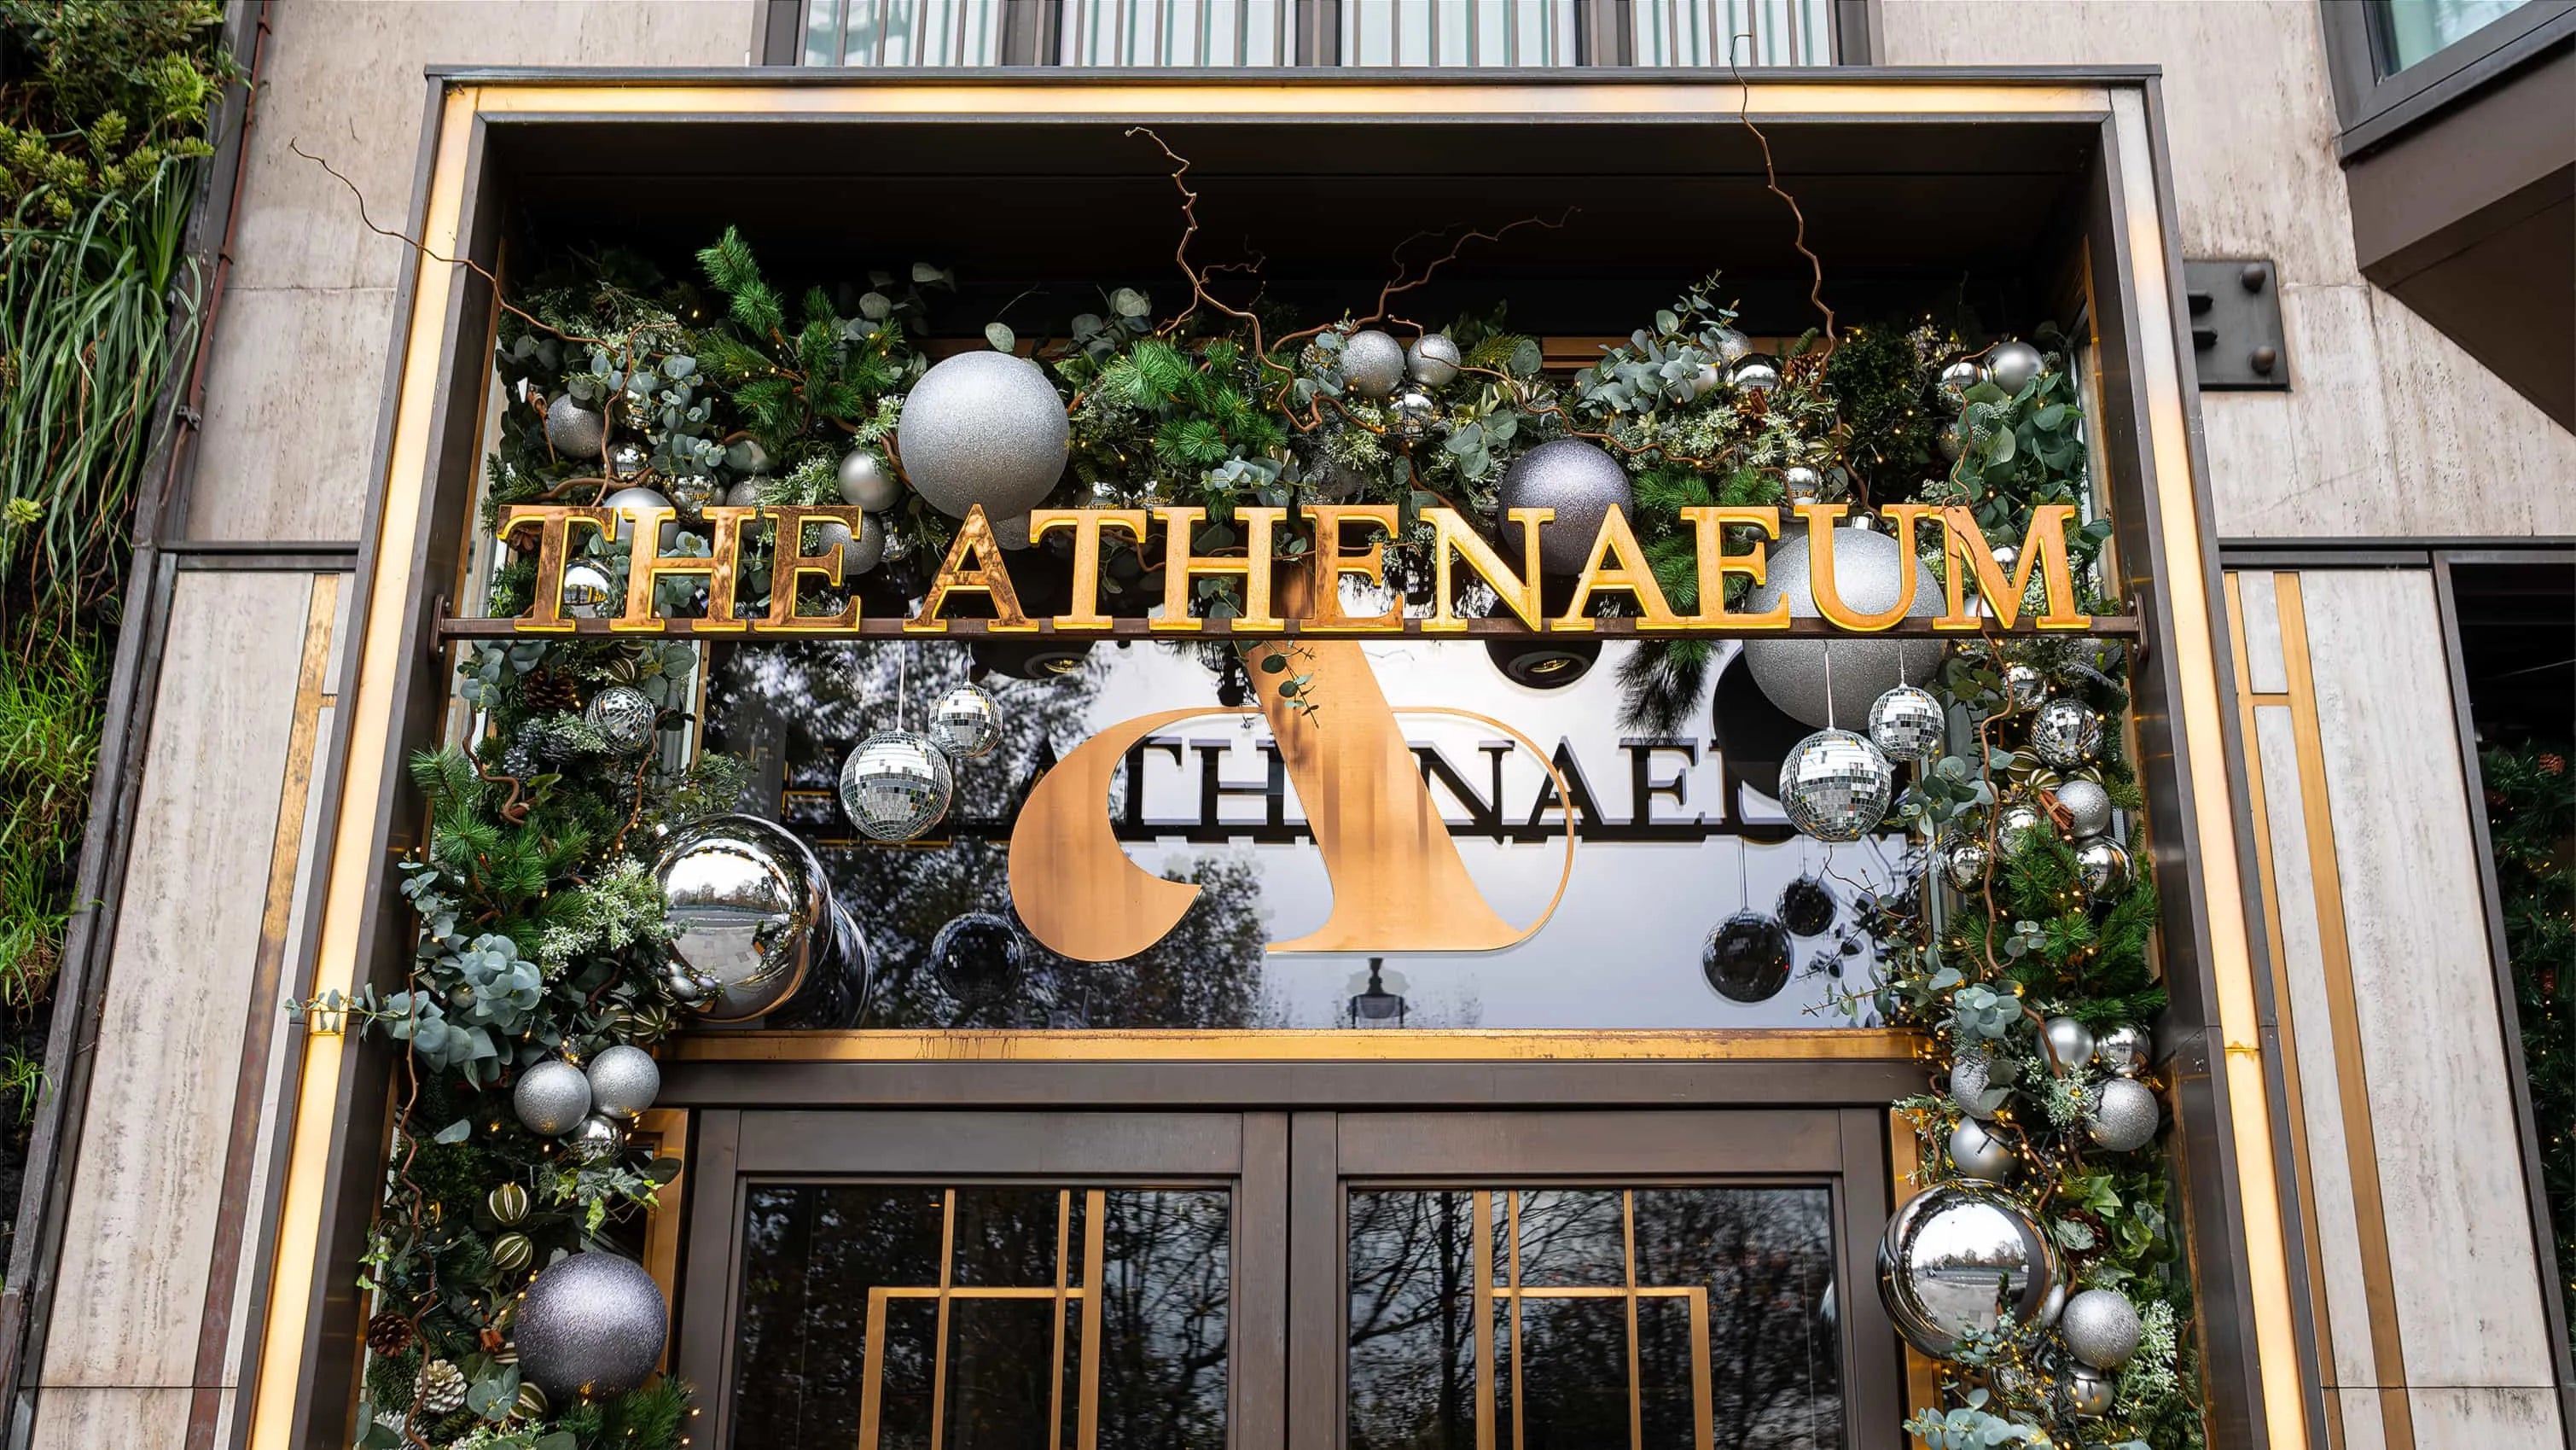 The entrance of 'The Athenaeum' hotel adorned with bespoke floral arrangements designed, produced, and installed by event florist Amaranté London, featuring a festive display of silver ornaments, twinkling lights, and a lush garland of greenery and eucalyptus leaves, highlighting the hotel's commitment to luxury and exclusivity.